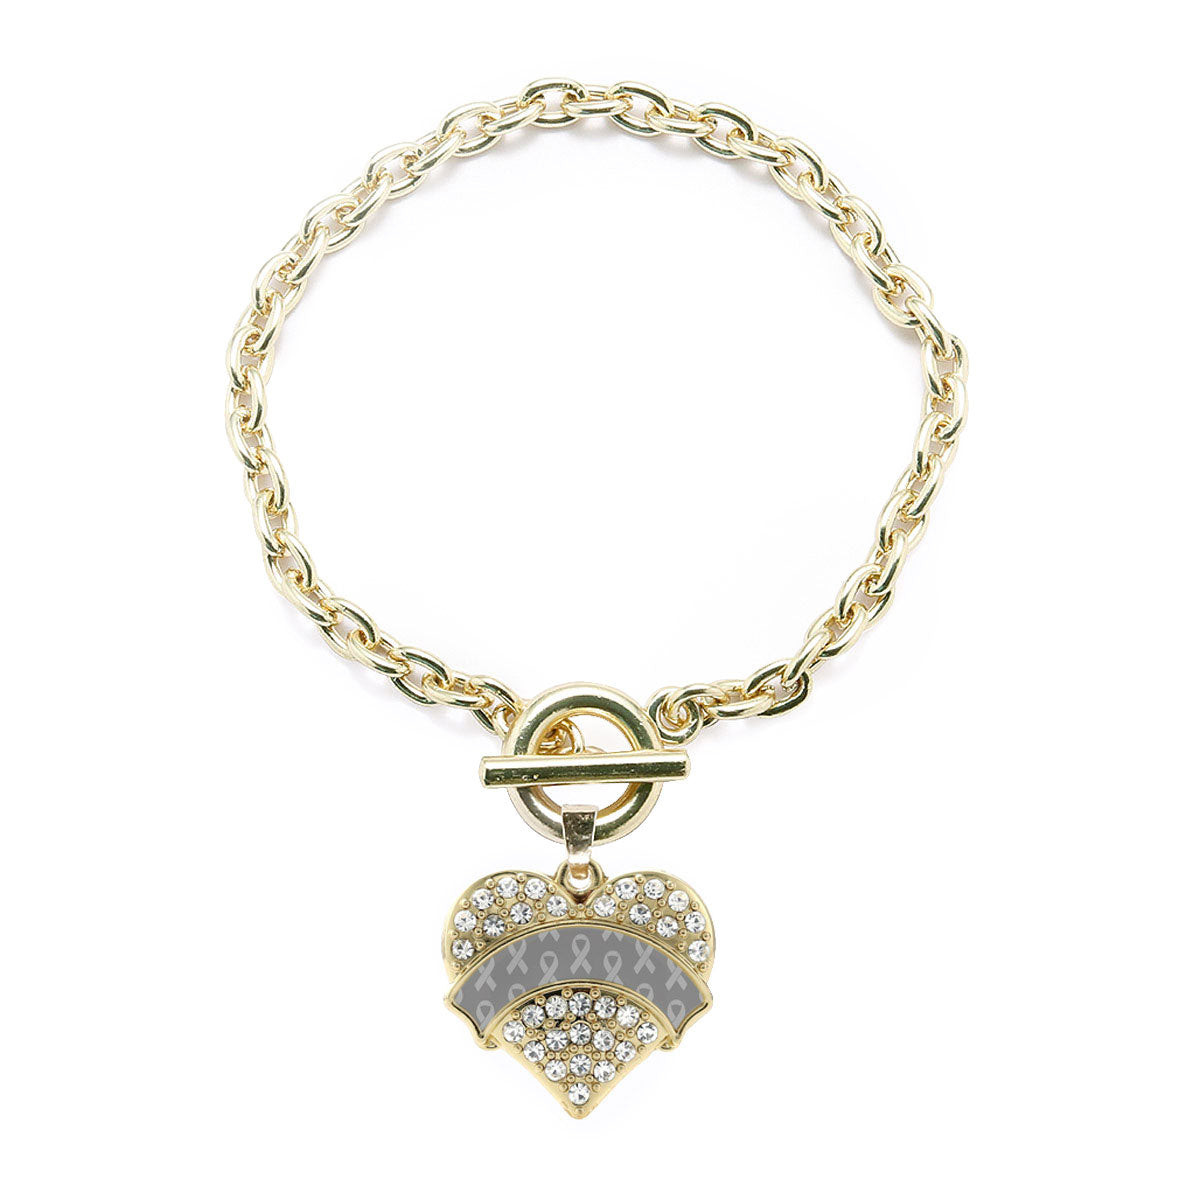 Gold Gray Ribbon Support Pave Heart Charm Toggle Bracelet